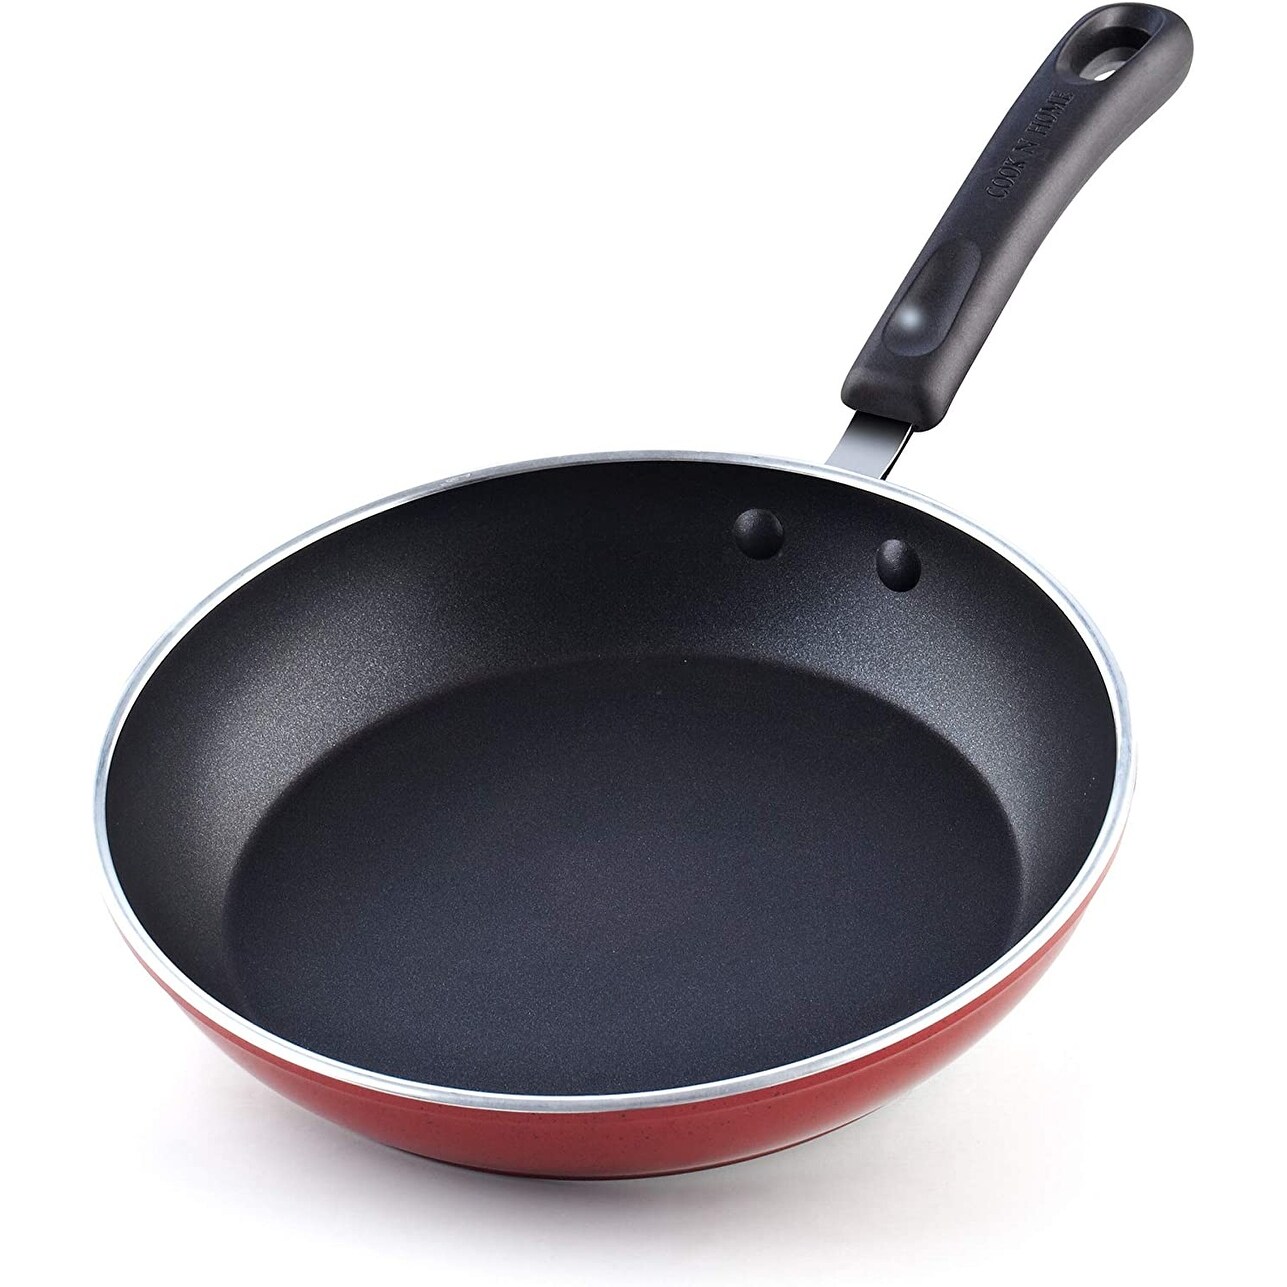 https://ak1.ostkcdn.com/images/products/is/images/direct/5b1193b06e0f4fed880d434af493e611d2d09242/Cook-N-Home-12-Piece-Nonstick-Stay-Cool-Handle-Cookware-Set%2C-Turquoise.jpg